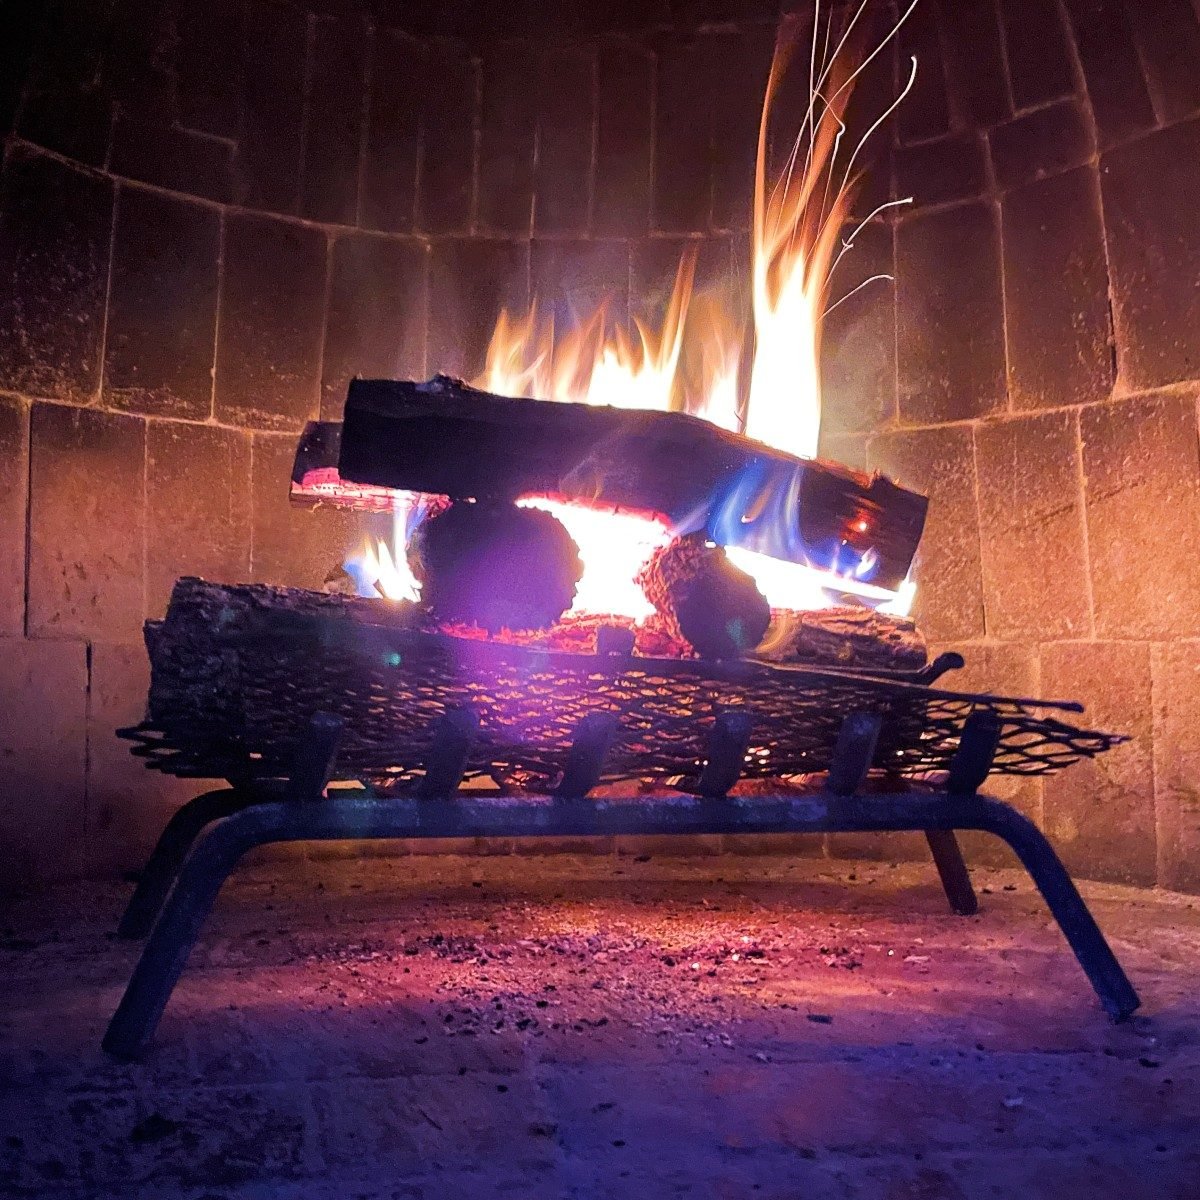 How To Start a Fire in a Fireplace